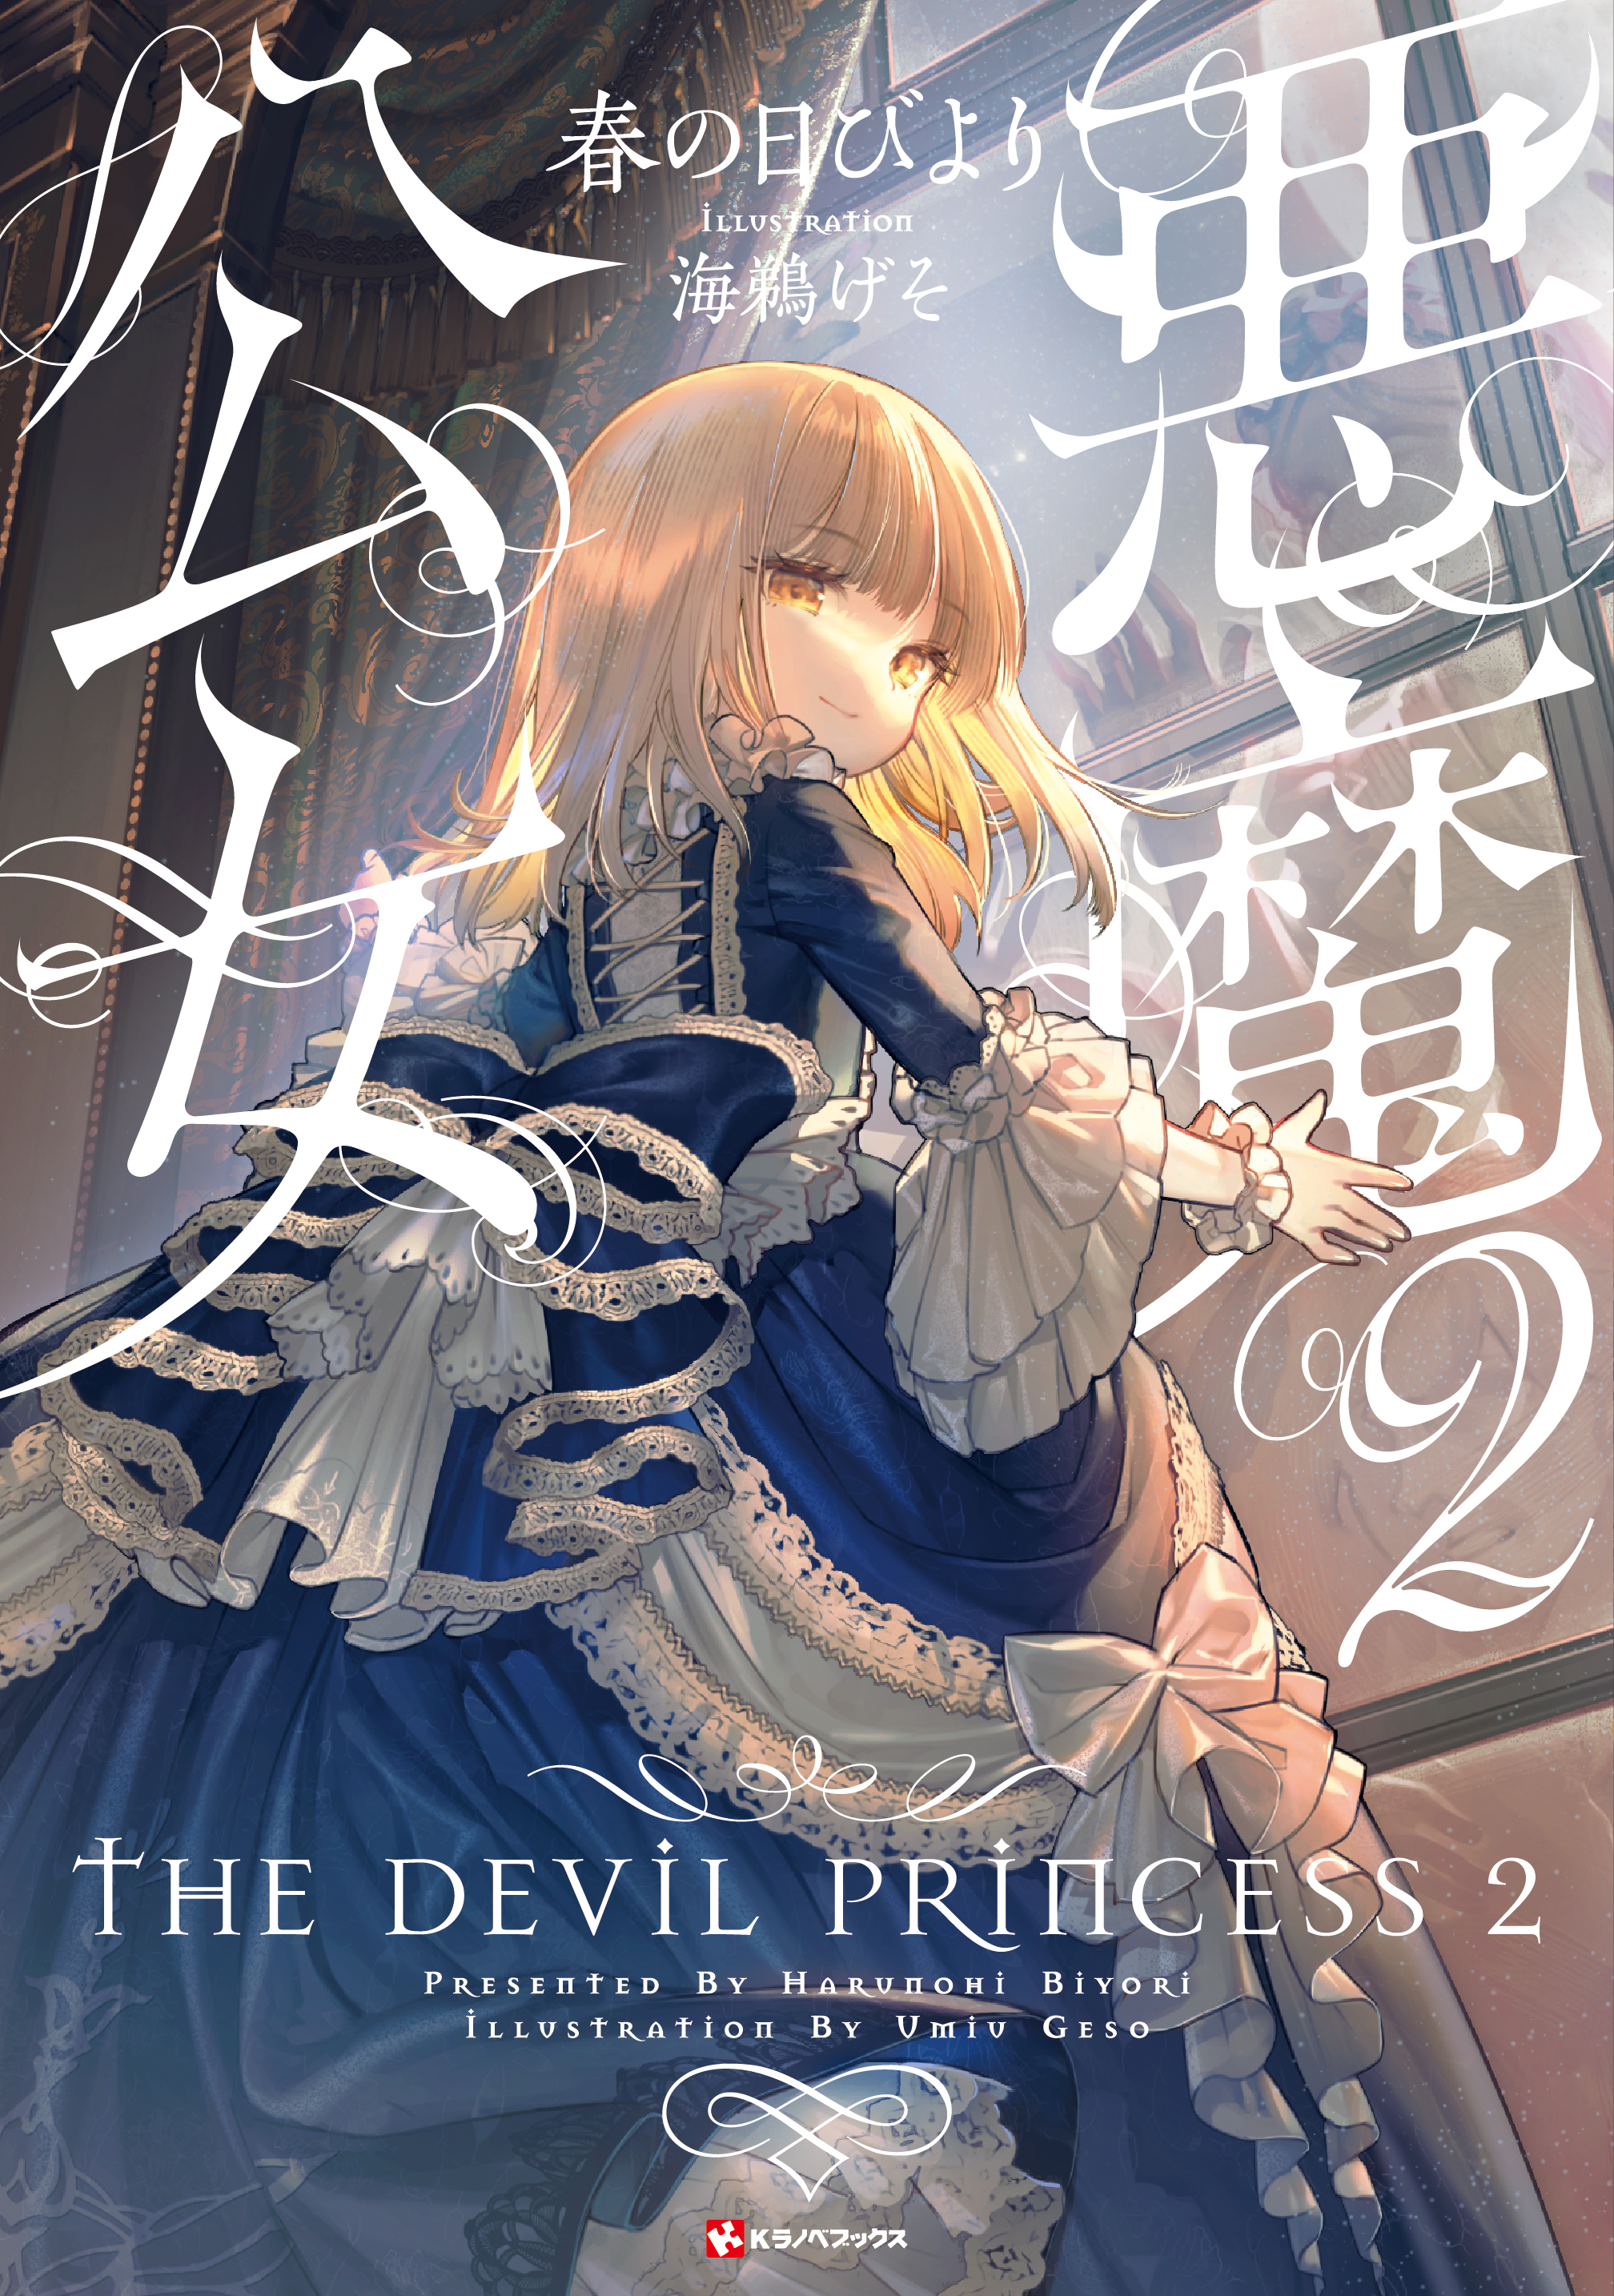 Bought by the demon lord before the ending webnovel